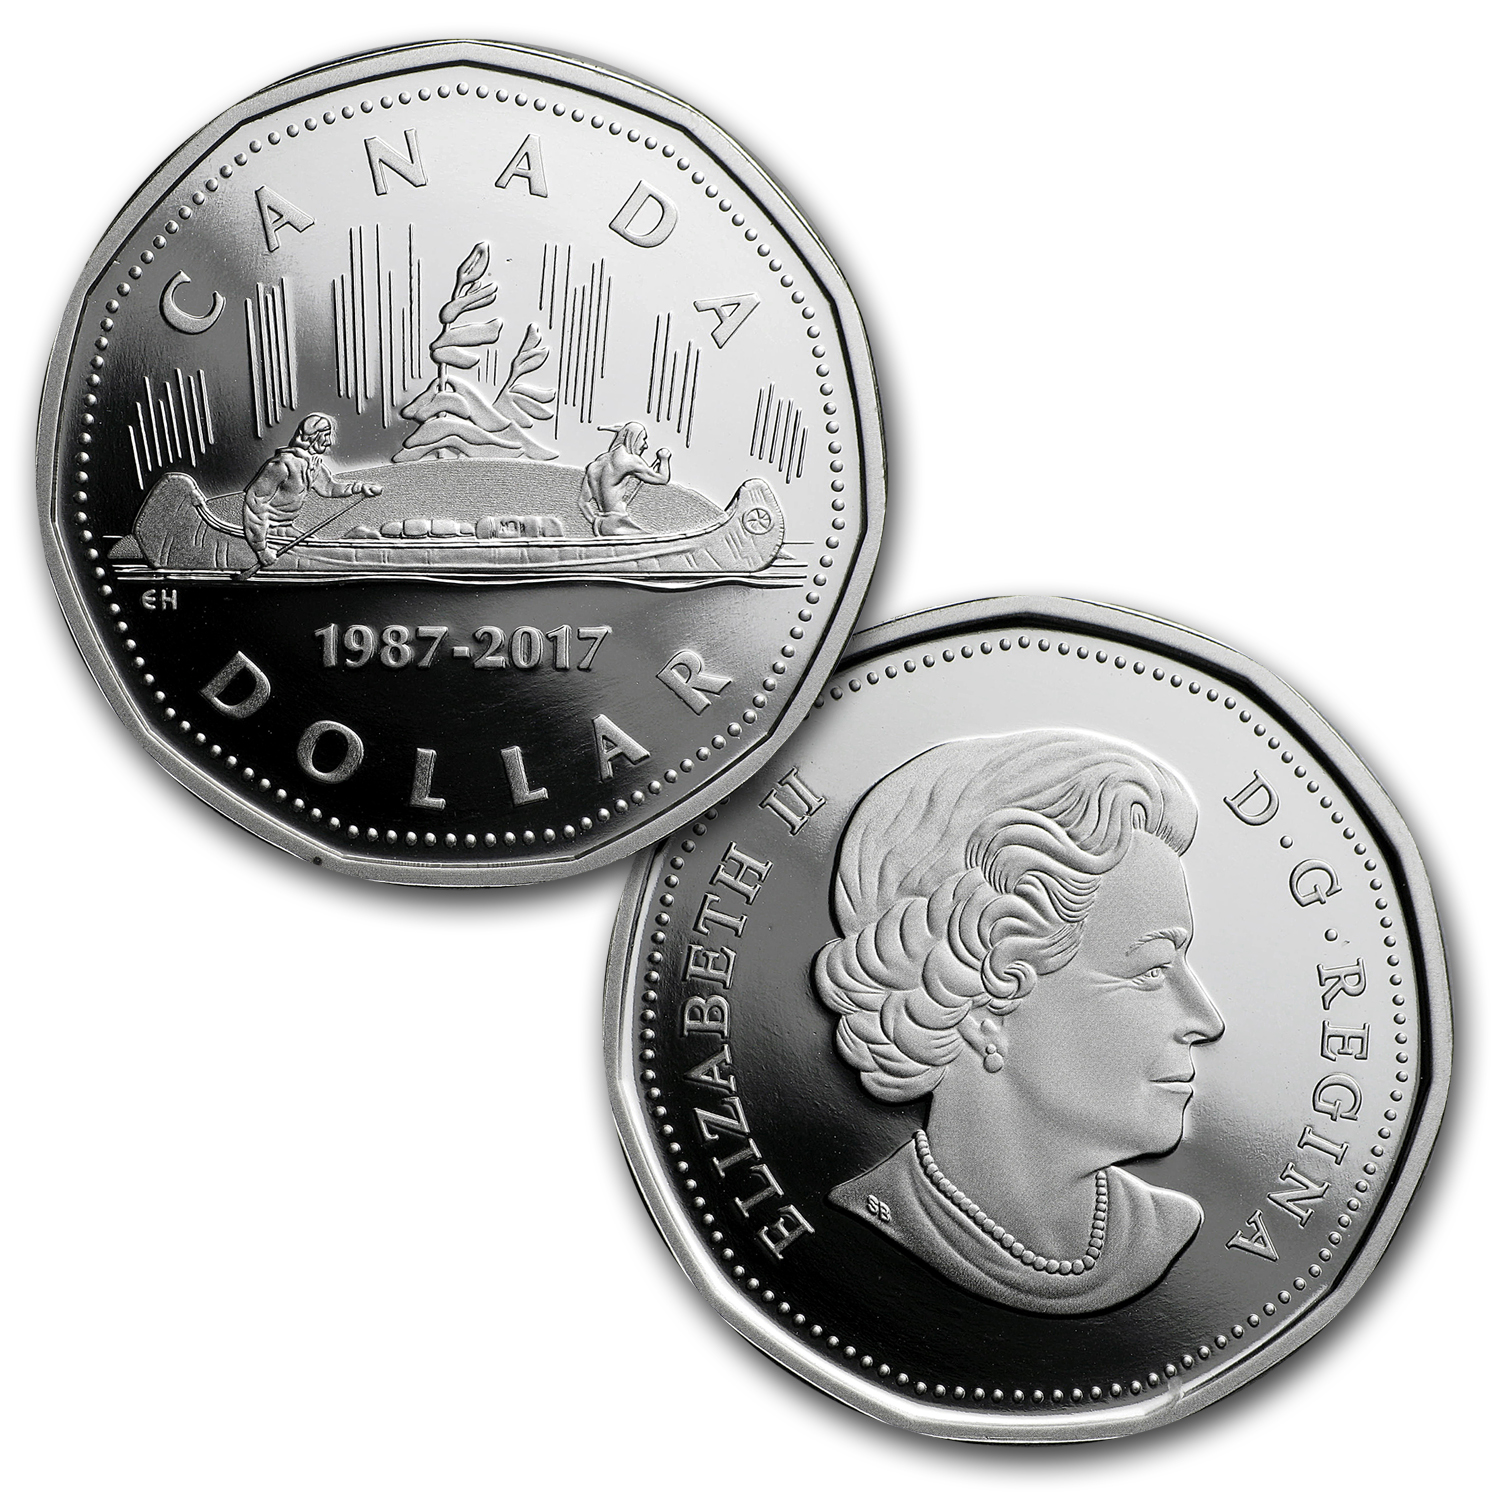 silver coins for sale at spot price